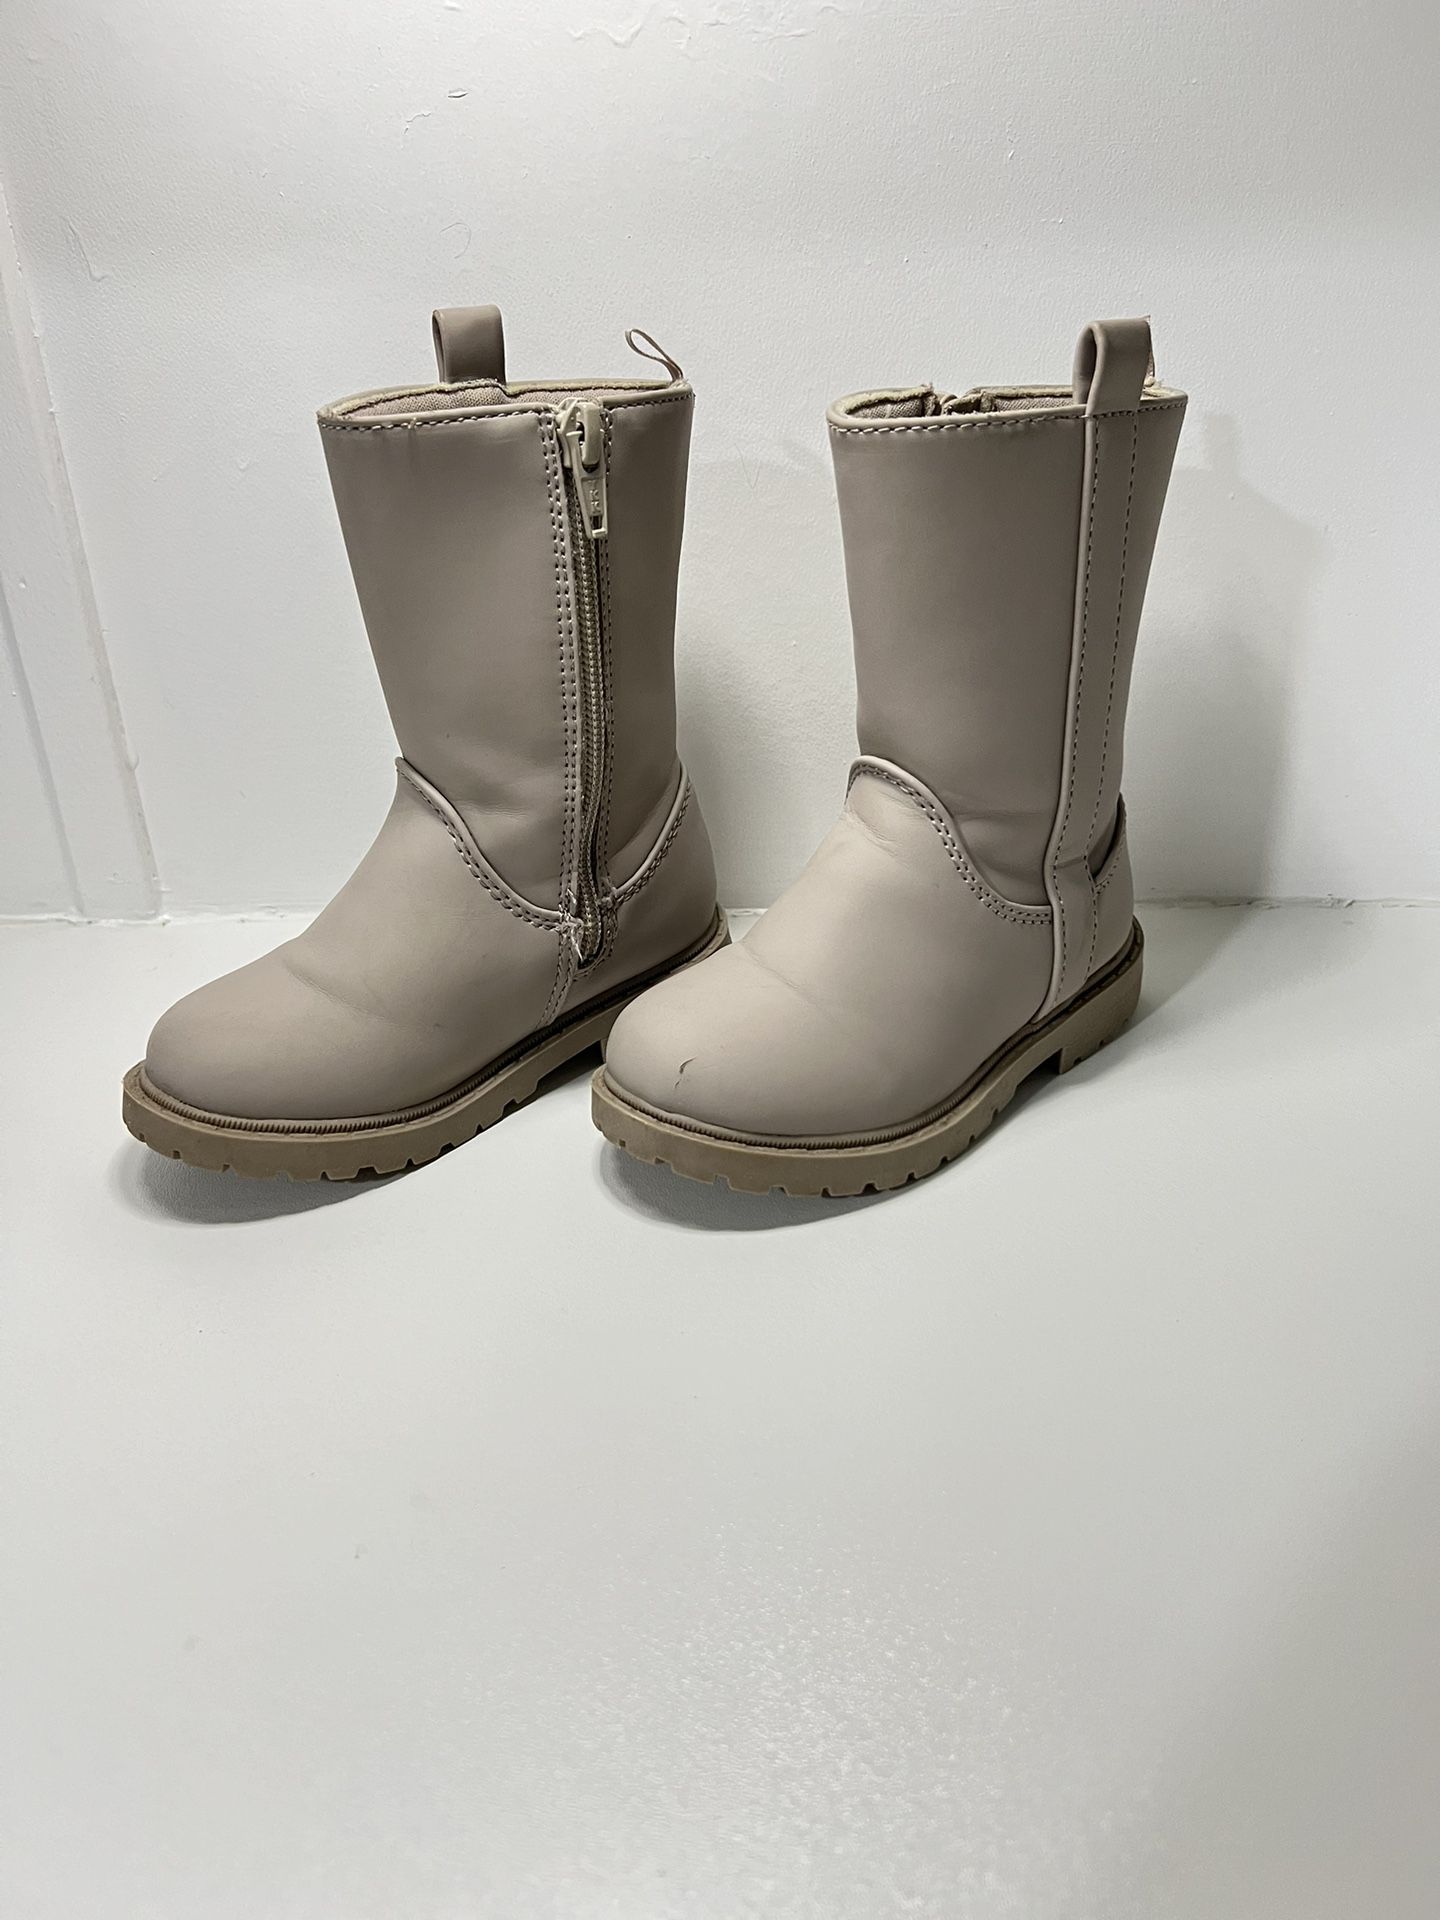 Old navy  toddler girl boots Grey color Size 7